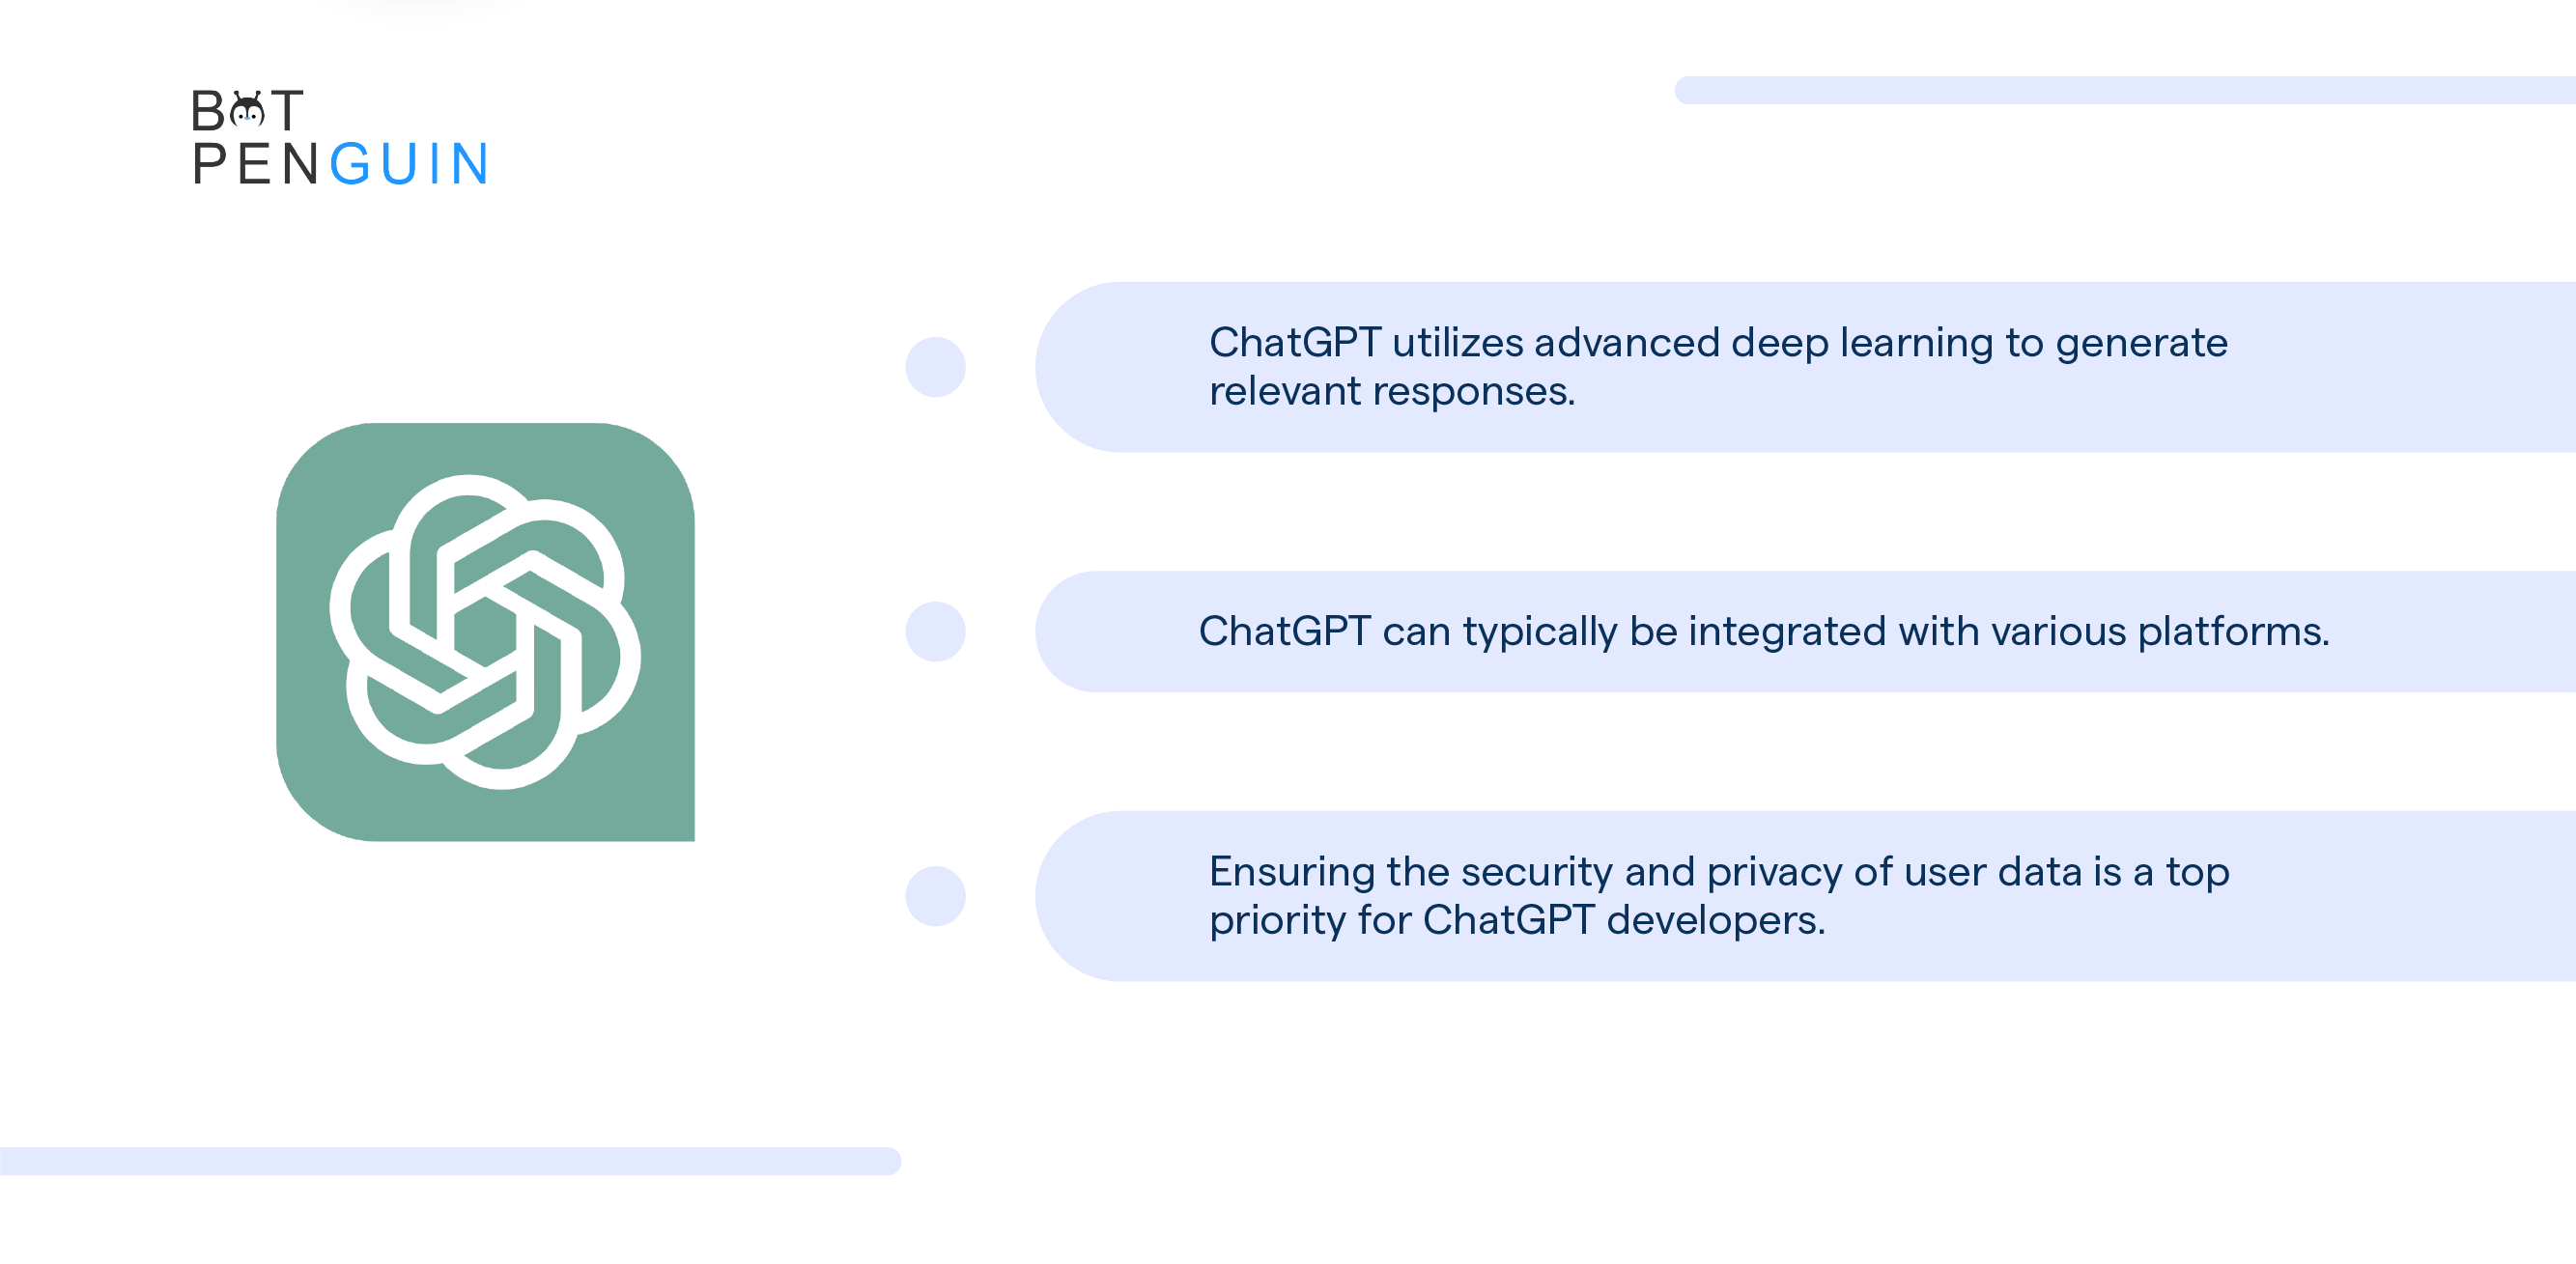 ChatGPT Frequently Asked Questions (FAQs)